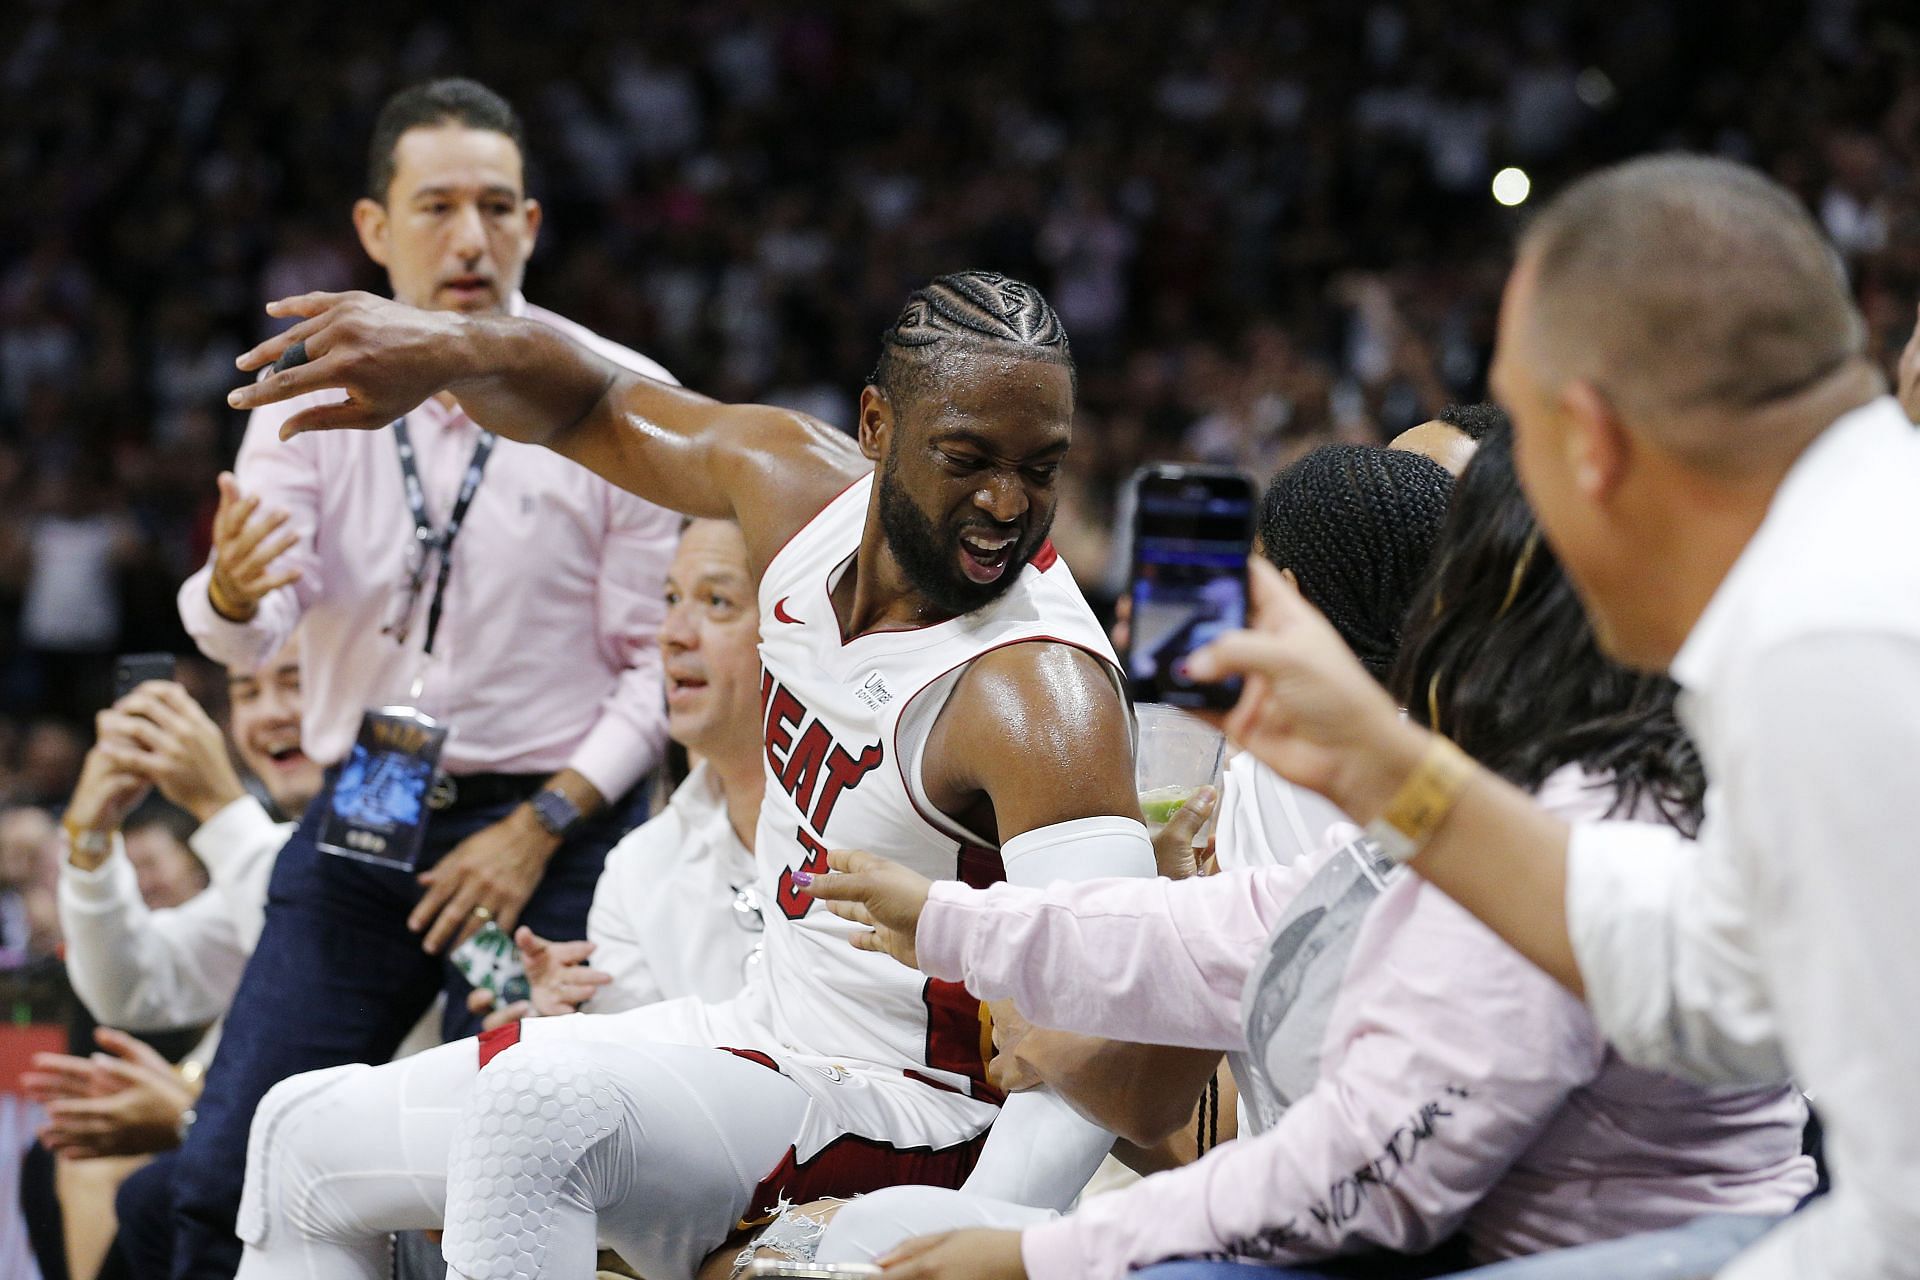 Dwyane Wade #3 of the Miami Heat falls into the fans after shooting a three pointer against the Philadelphia 76ers during the second half at American Airlines Arena on April 09, 2019 in Miami, Florida.